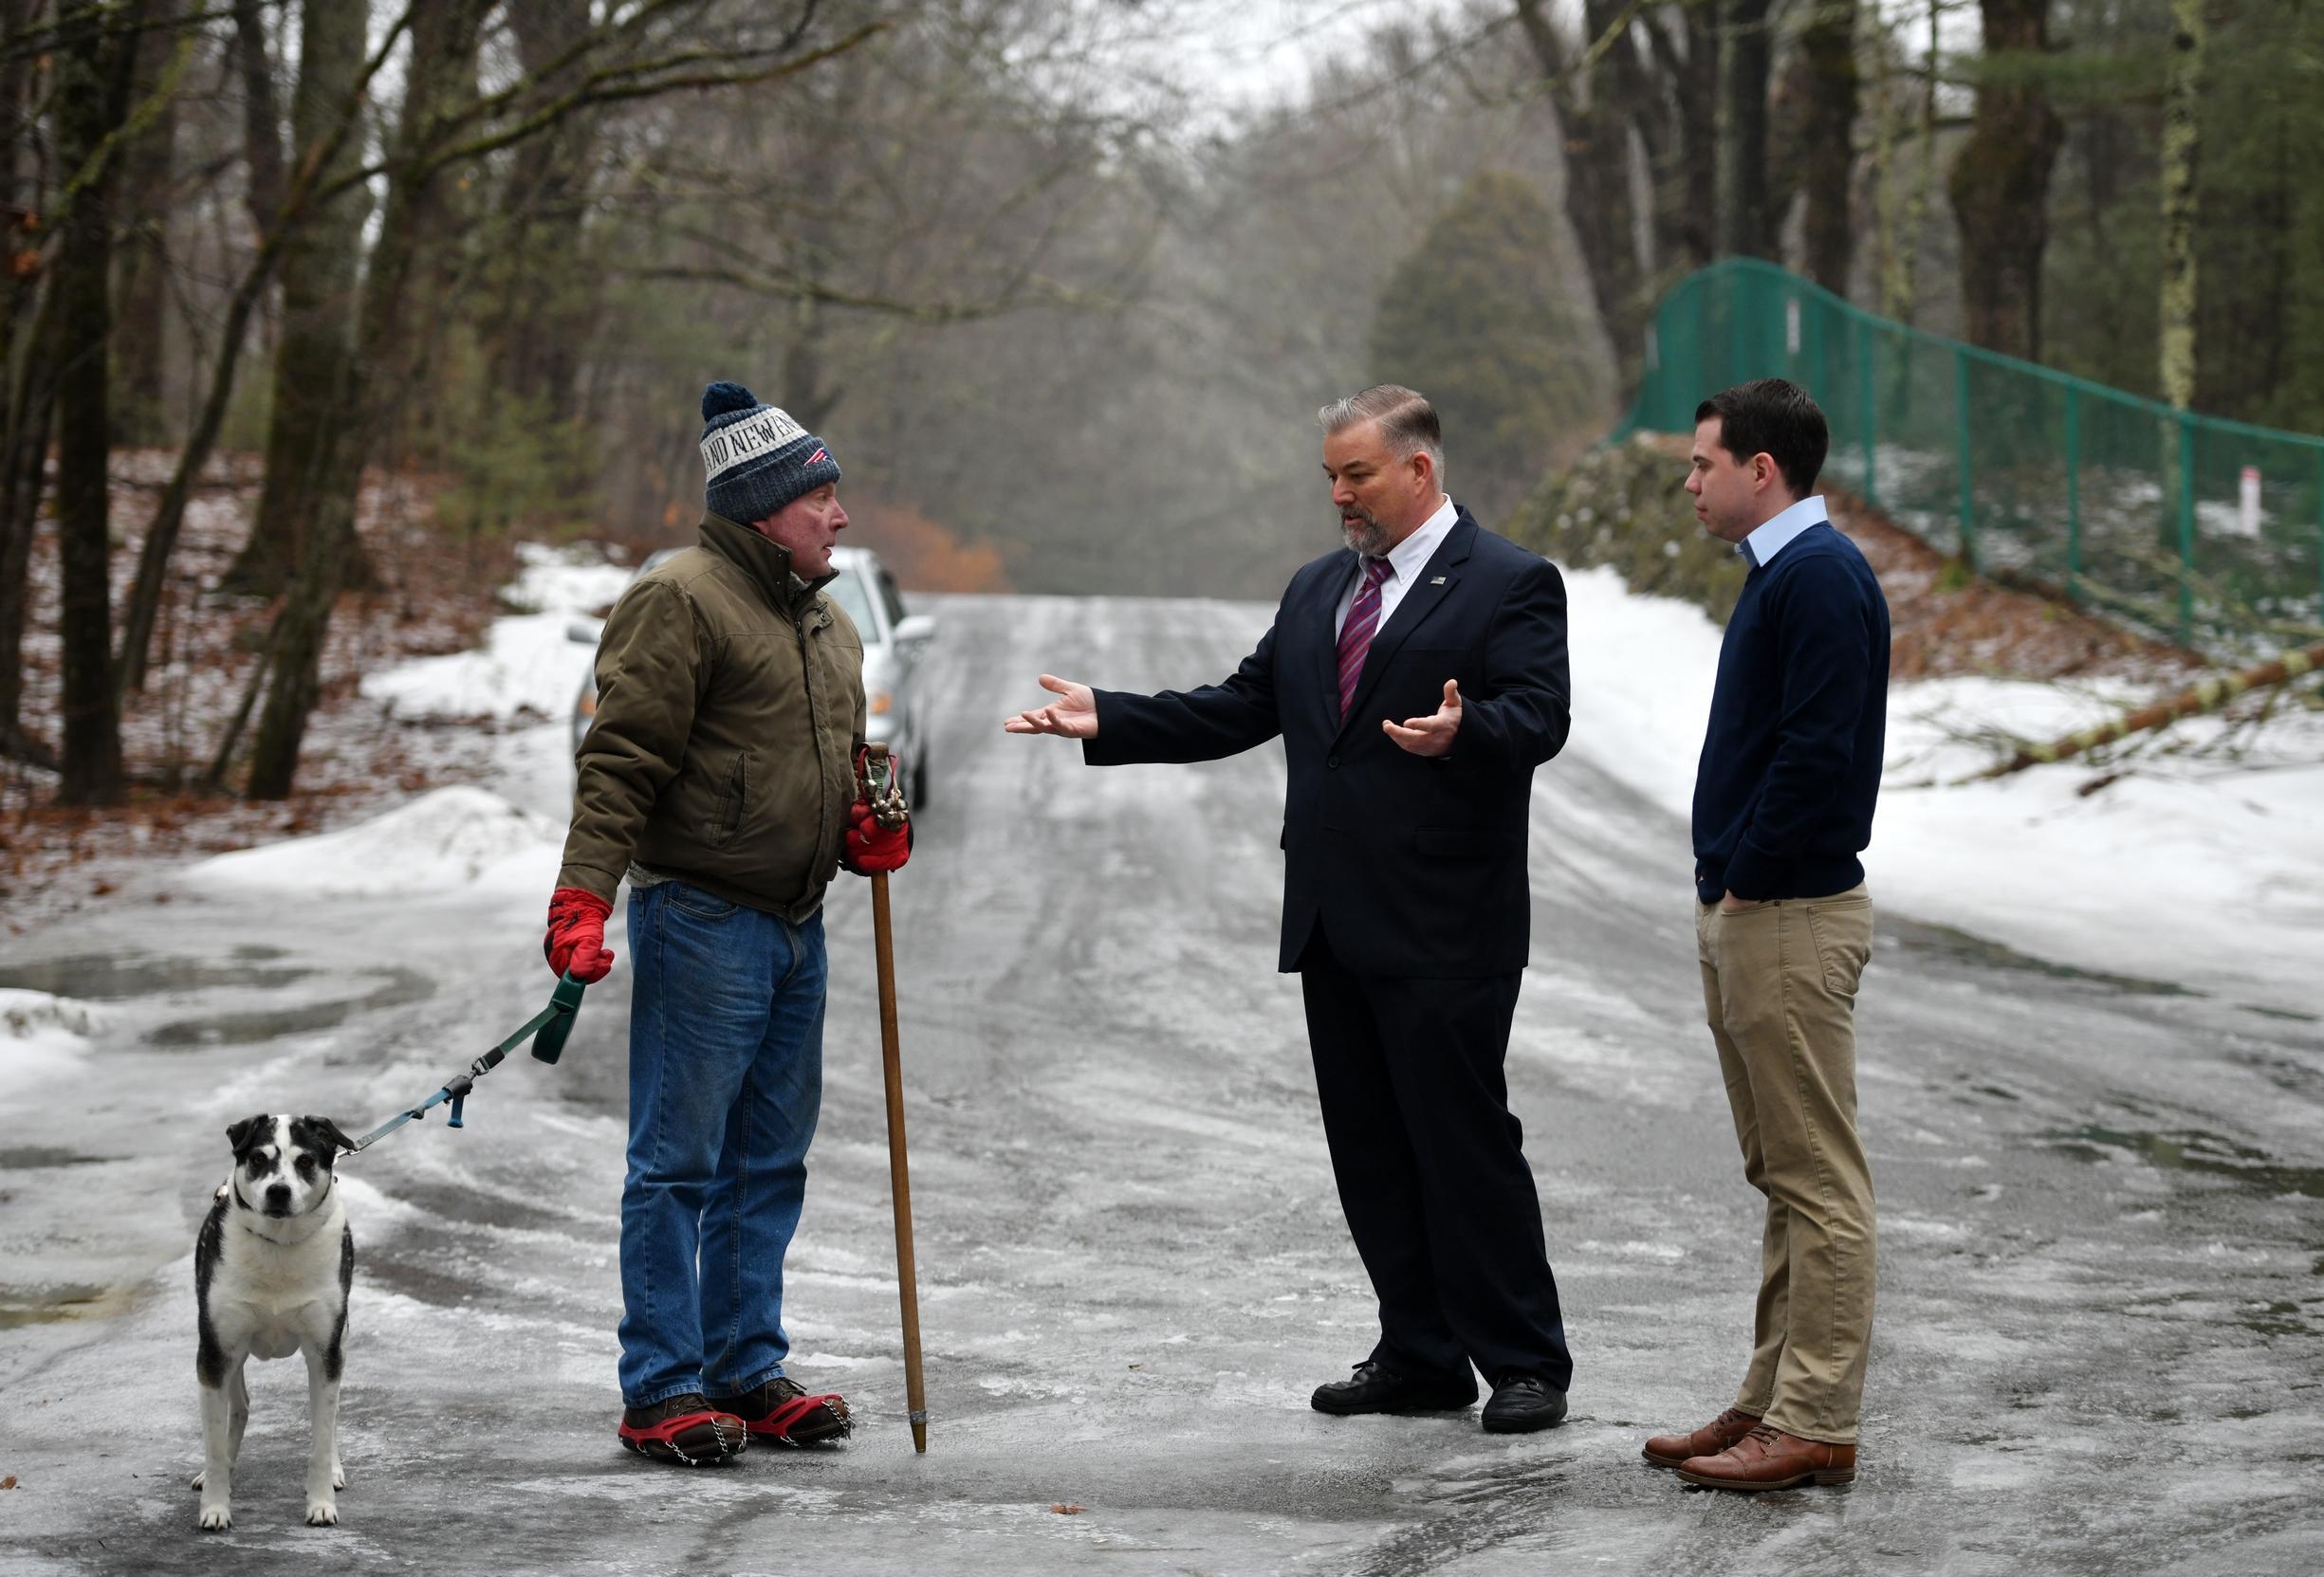 Patrick Culhane of Worcester holds his dog Mias leash as he talks with Town Adminstrator Mike Nicholson and Rutland Selectman Jeff Stillings near a closed gate in the trail system in Rutland State Park on Tuesday. [T&G Staff/Christine Peterson]